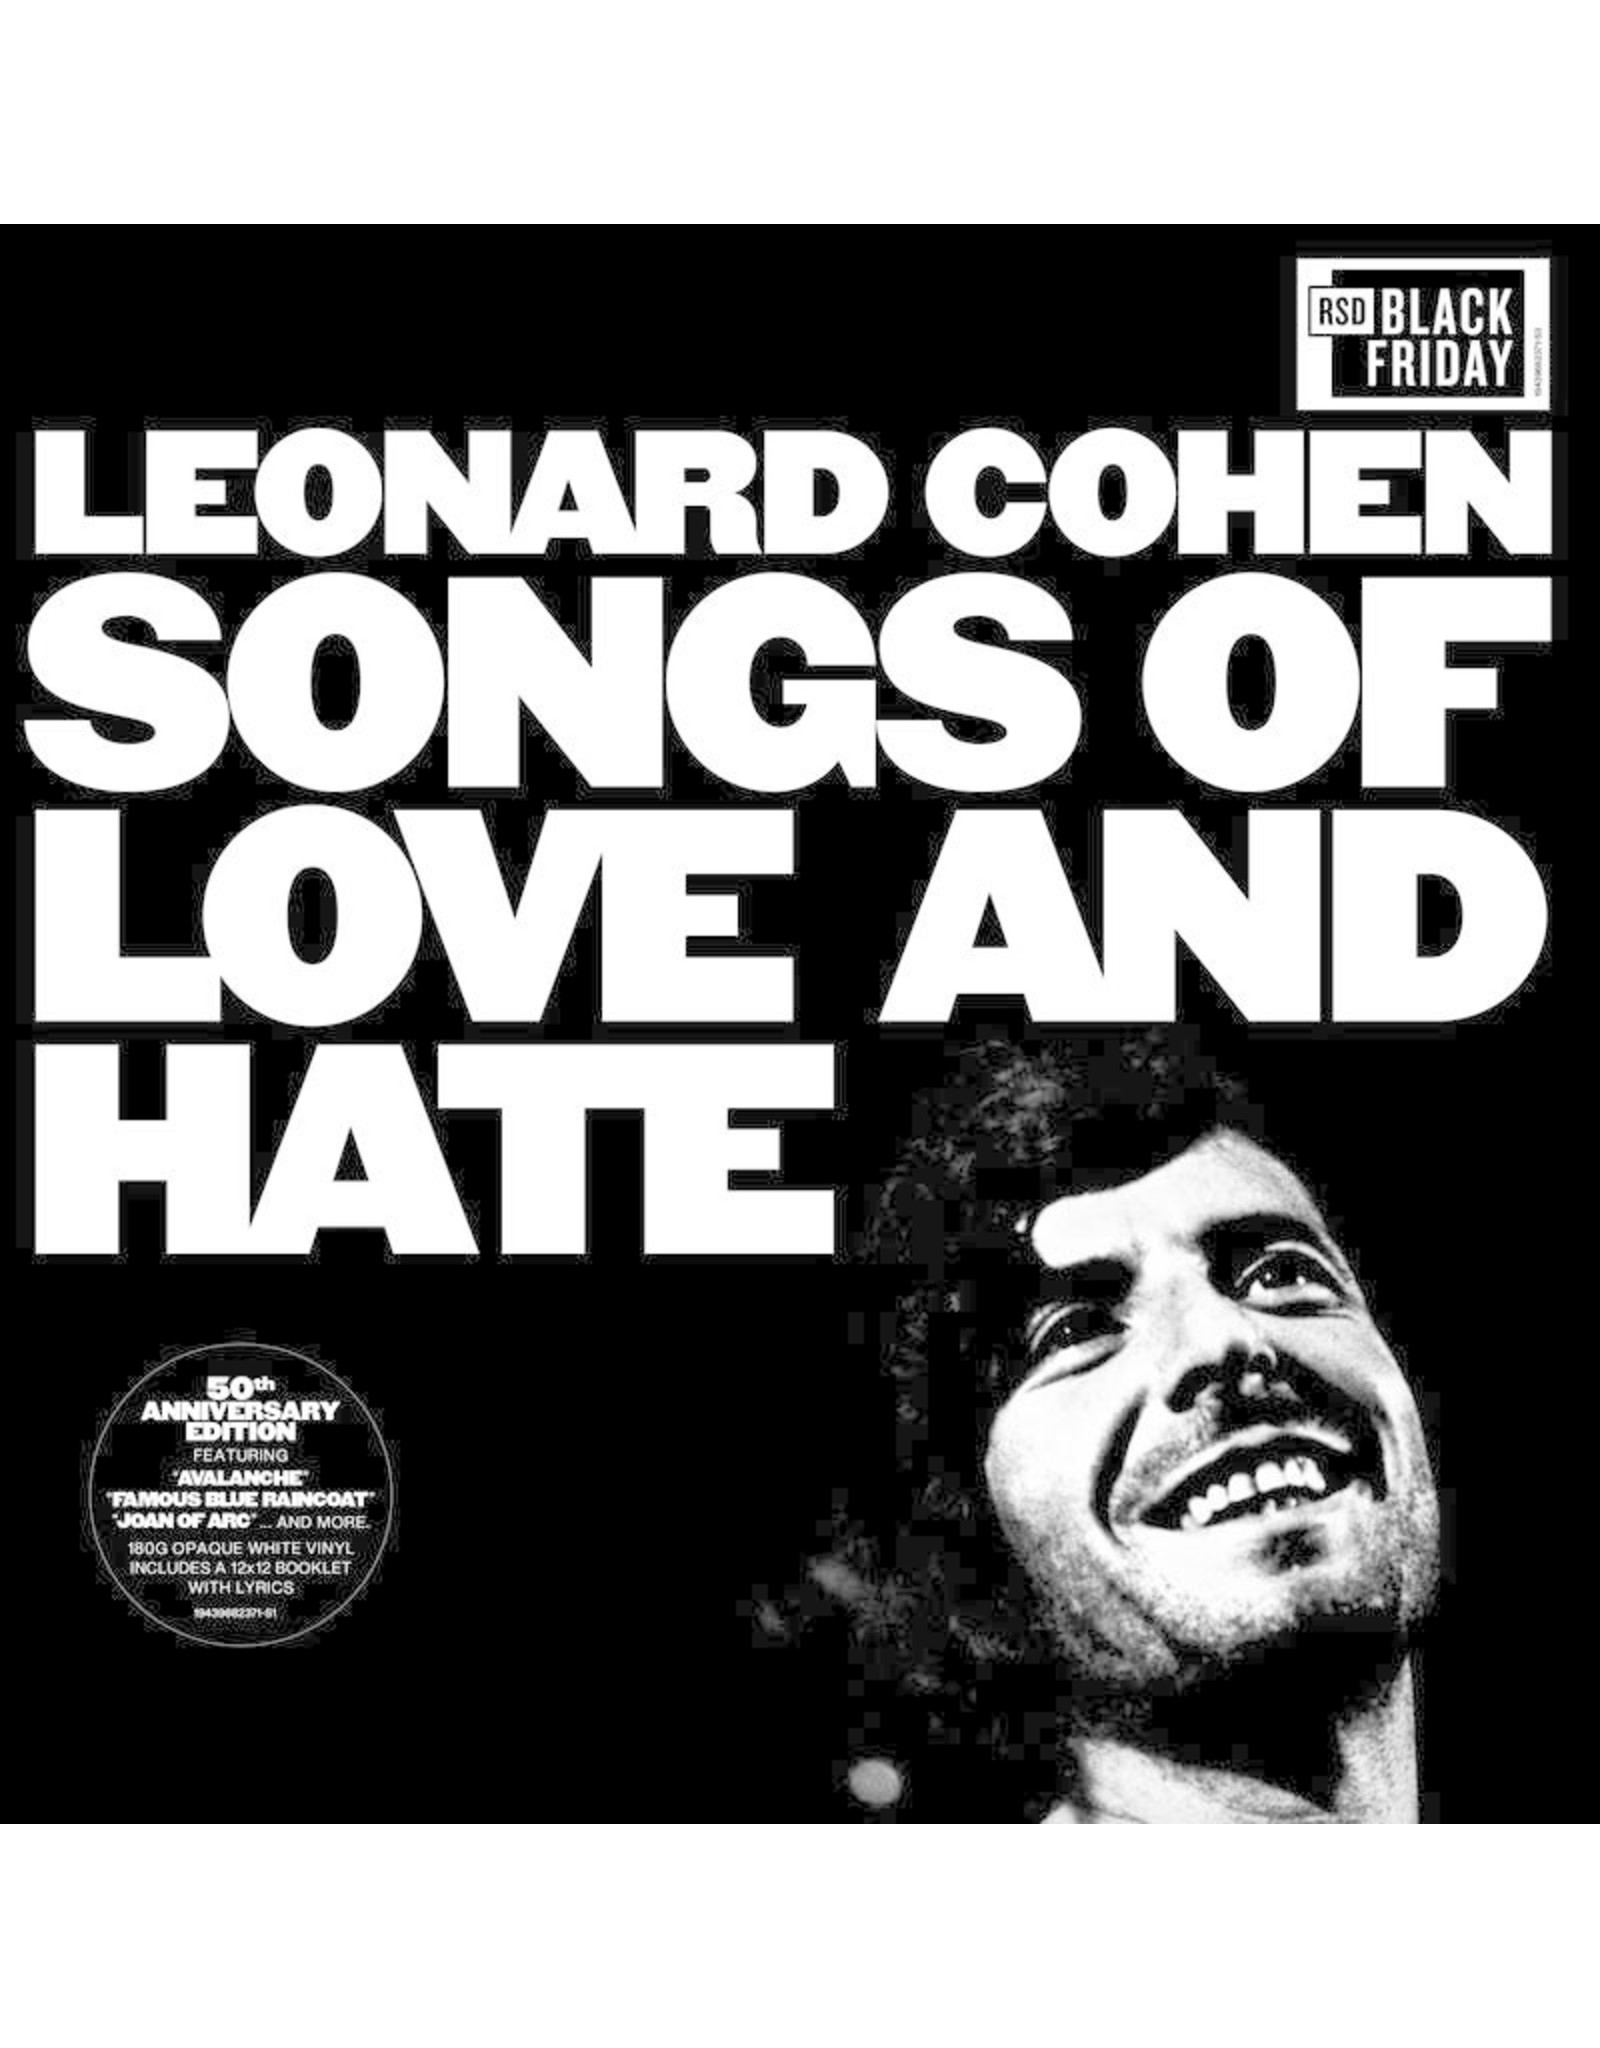 Leonard Cohen - Songs of Love and Hate (Exclusive White Vinyl)